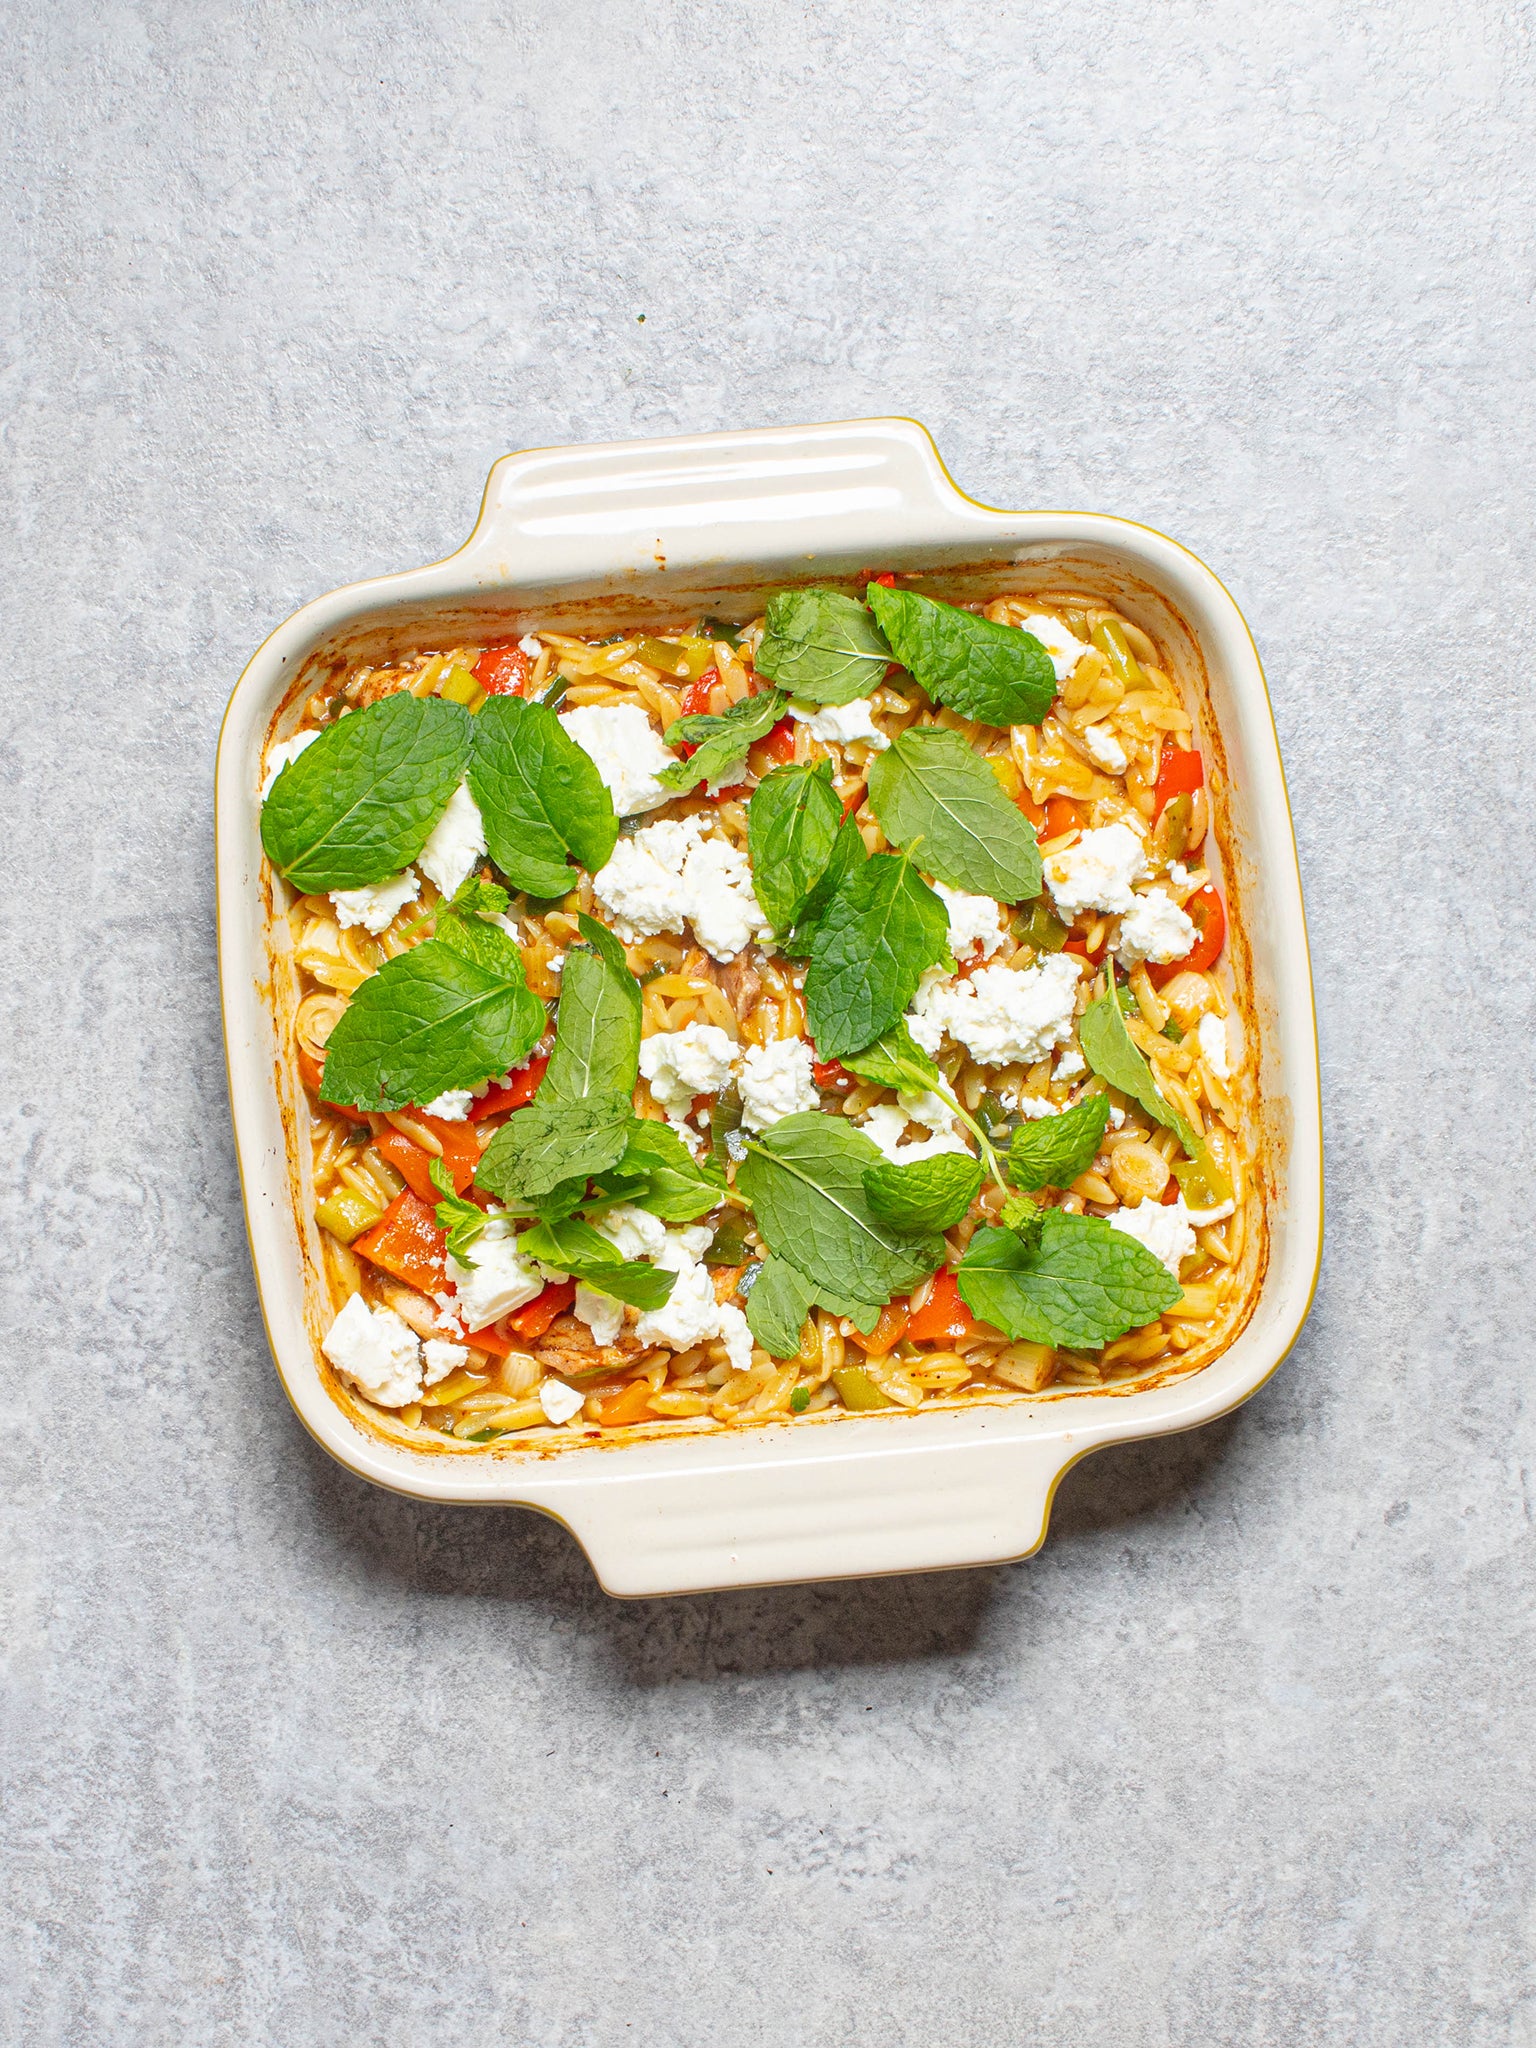 This Greek-style chicken orzo bake brings together bold flavours in one tray